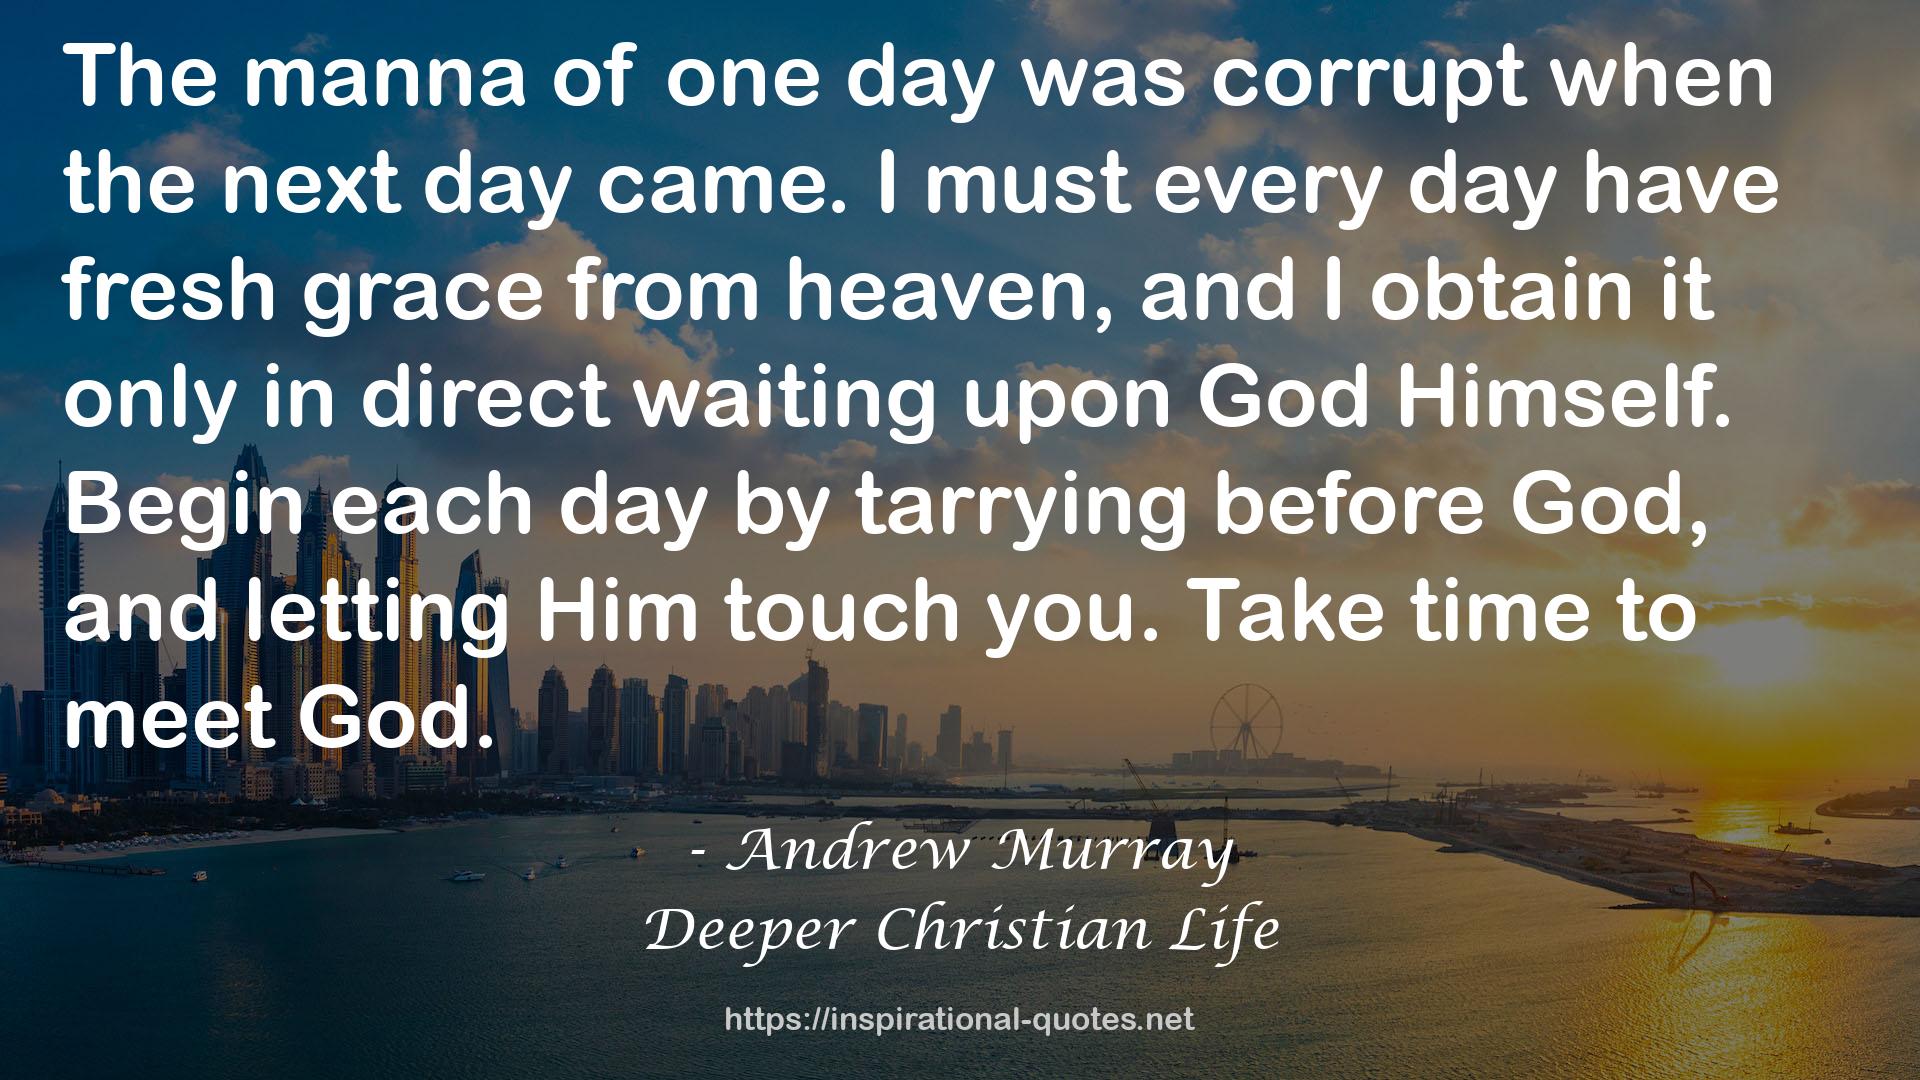 Deeper Christian Life QUOTES